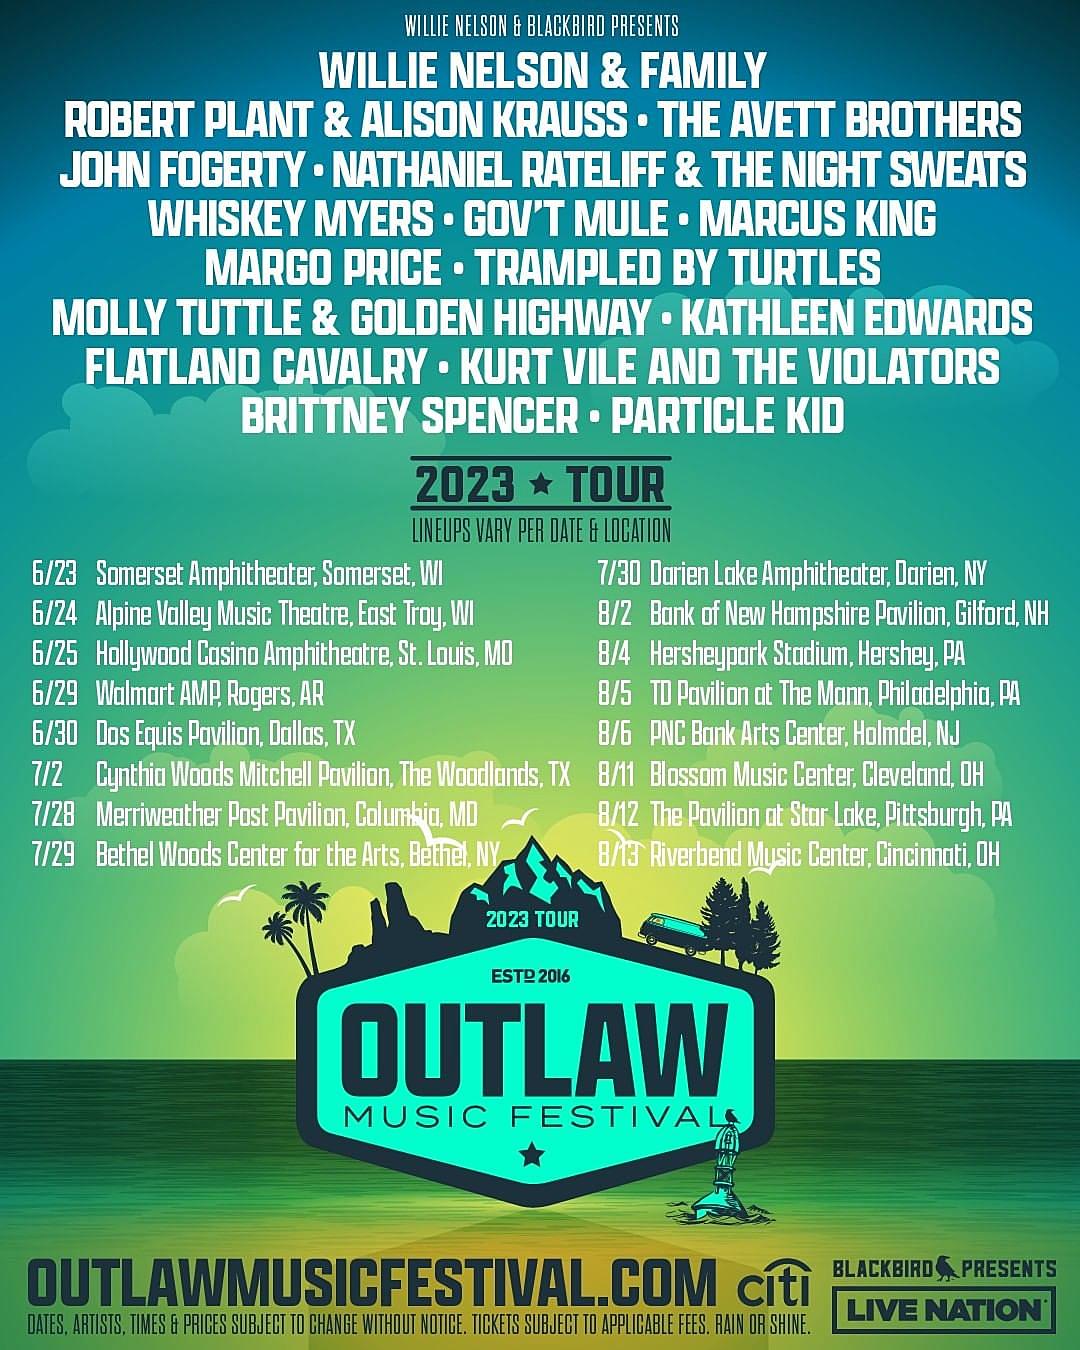 Willie Nelson Reveals Outlaw Music Festival Lineup Featuring John